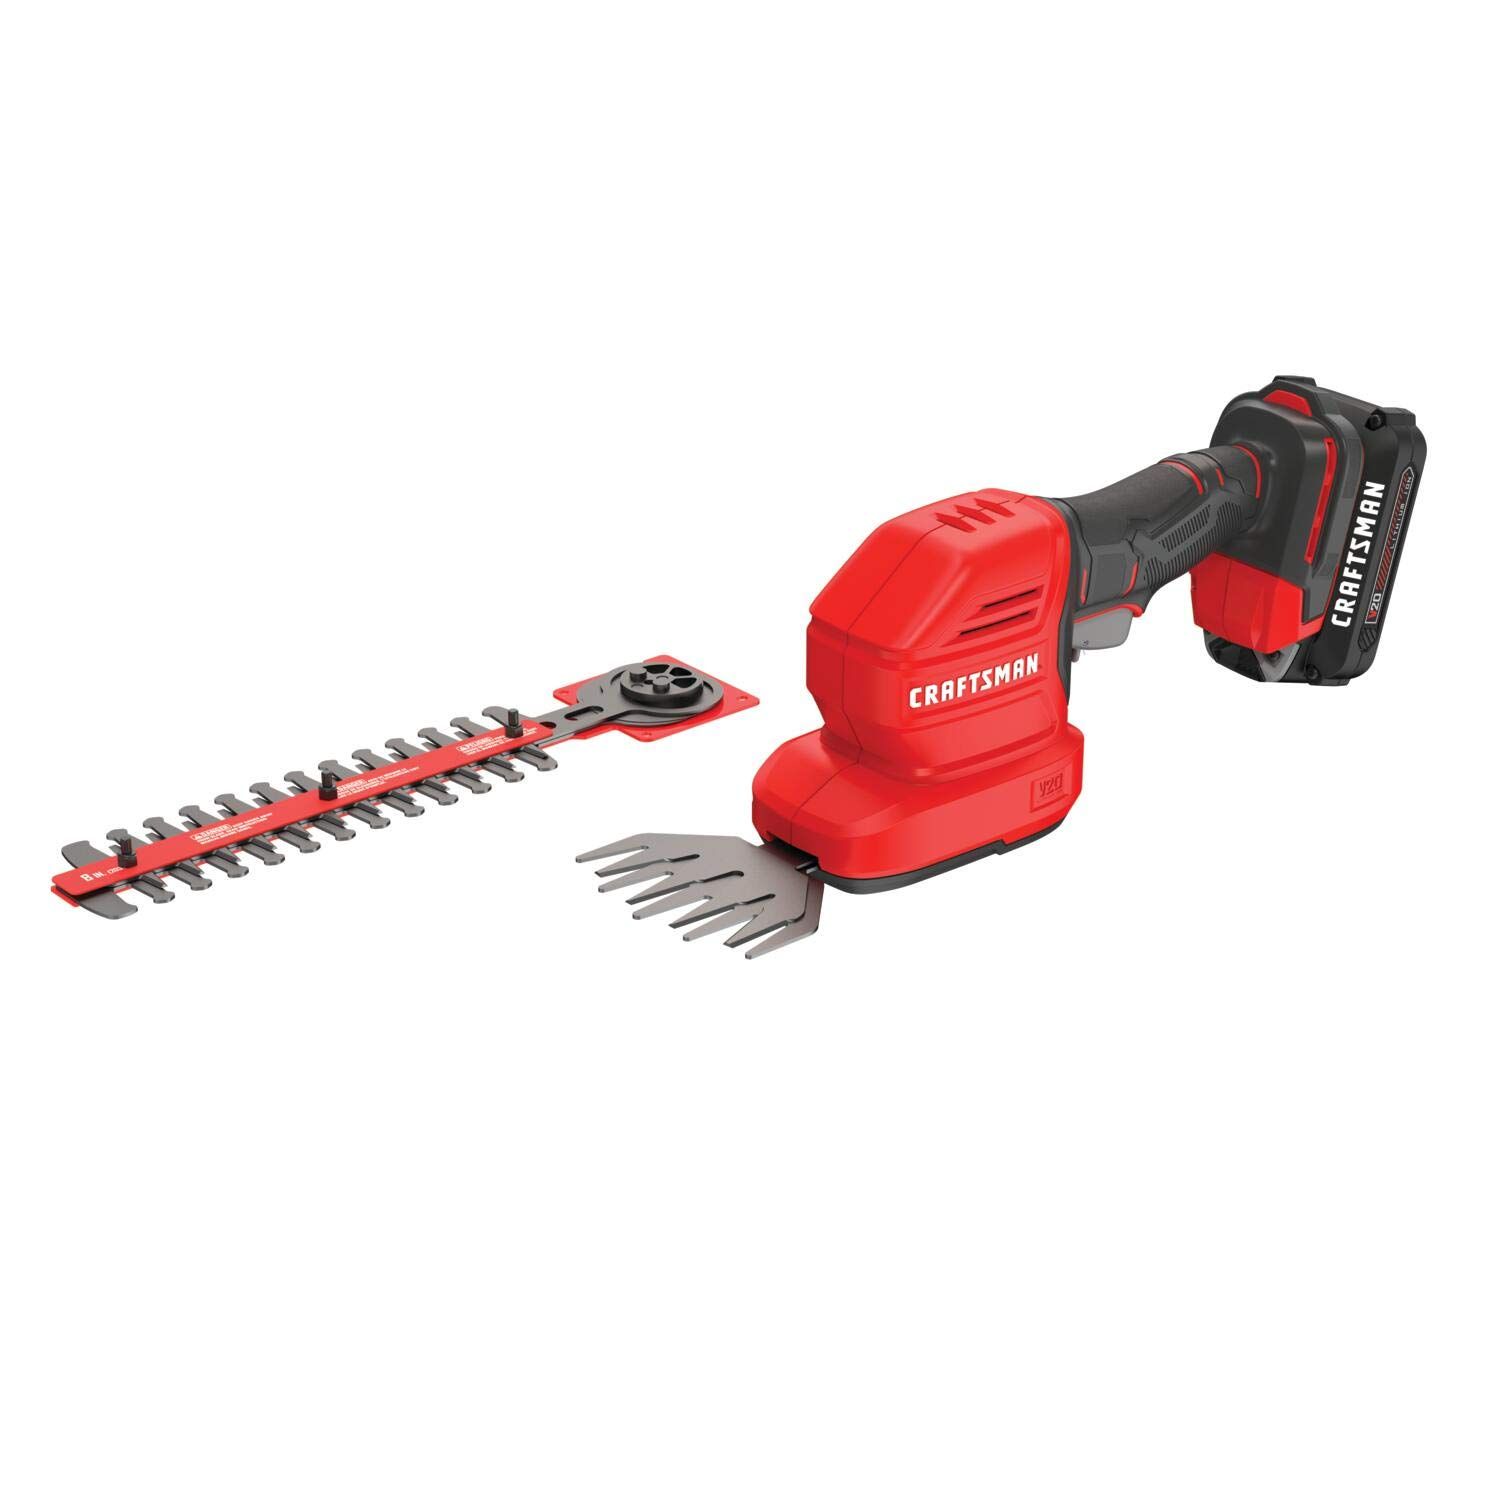 CRAFTSMAN V20 Cordless Handheld Grass Trimmer and Mini Hedge Trimmer Kit (CMCSS800C1),Red | Amazon (US)